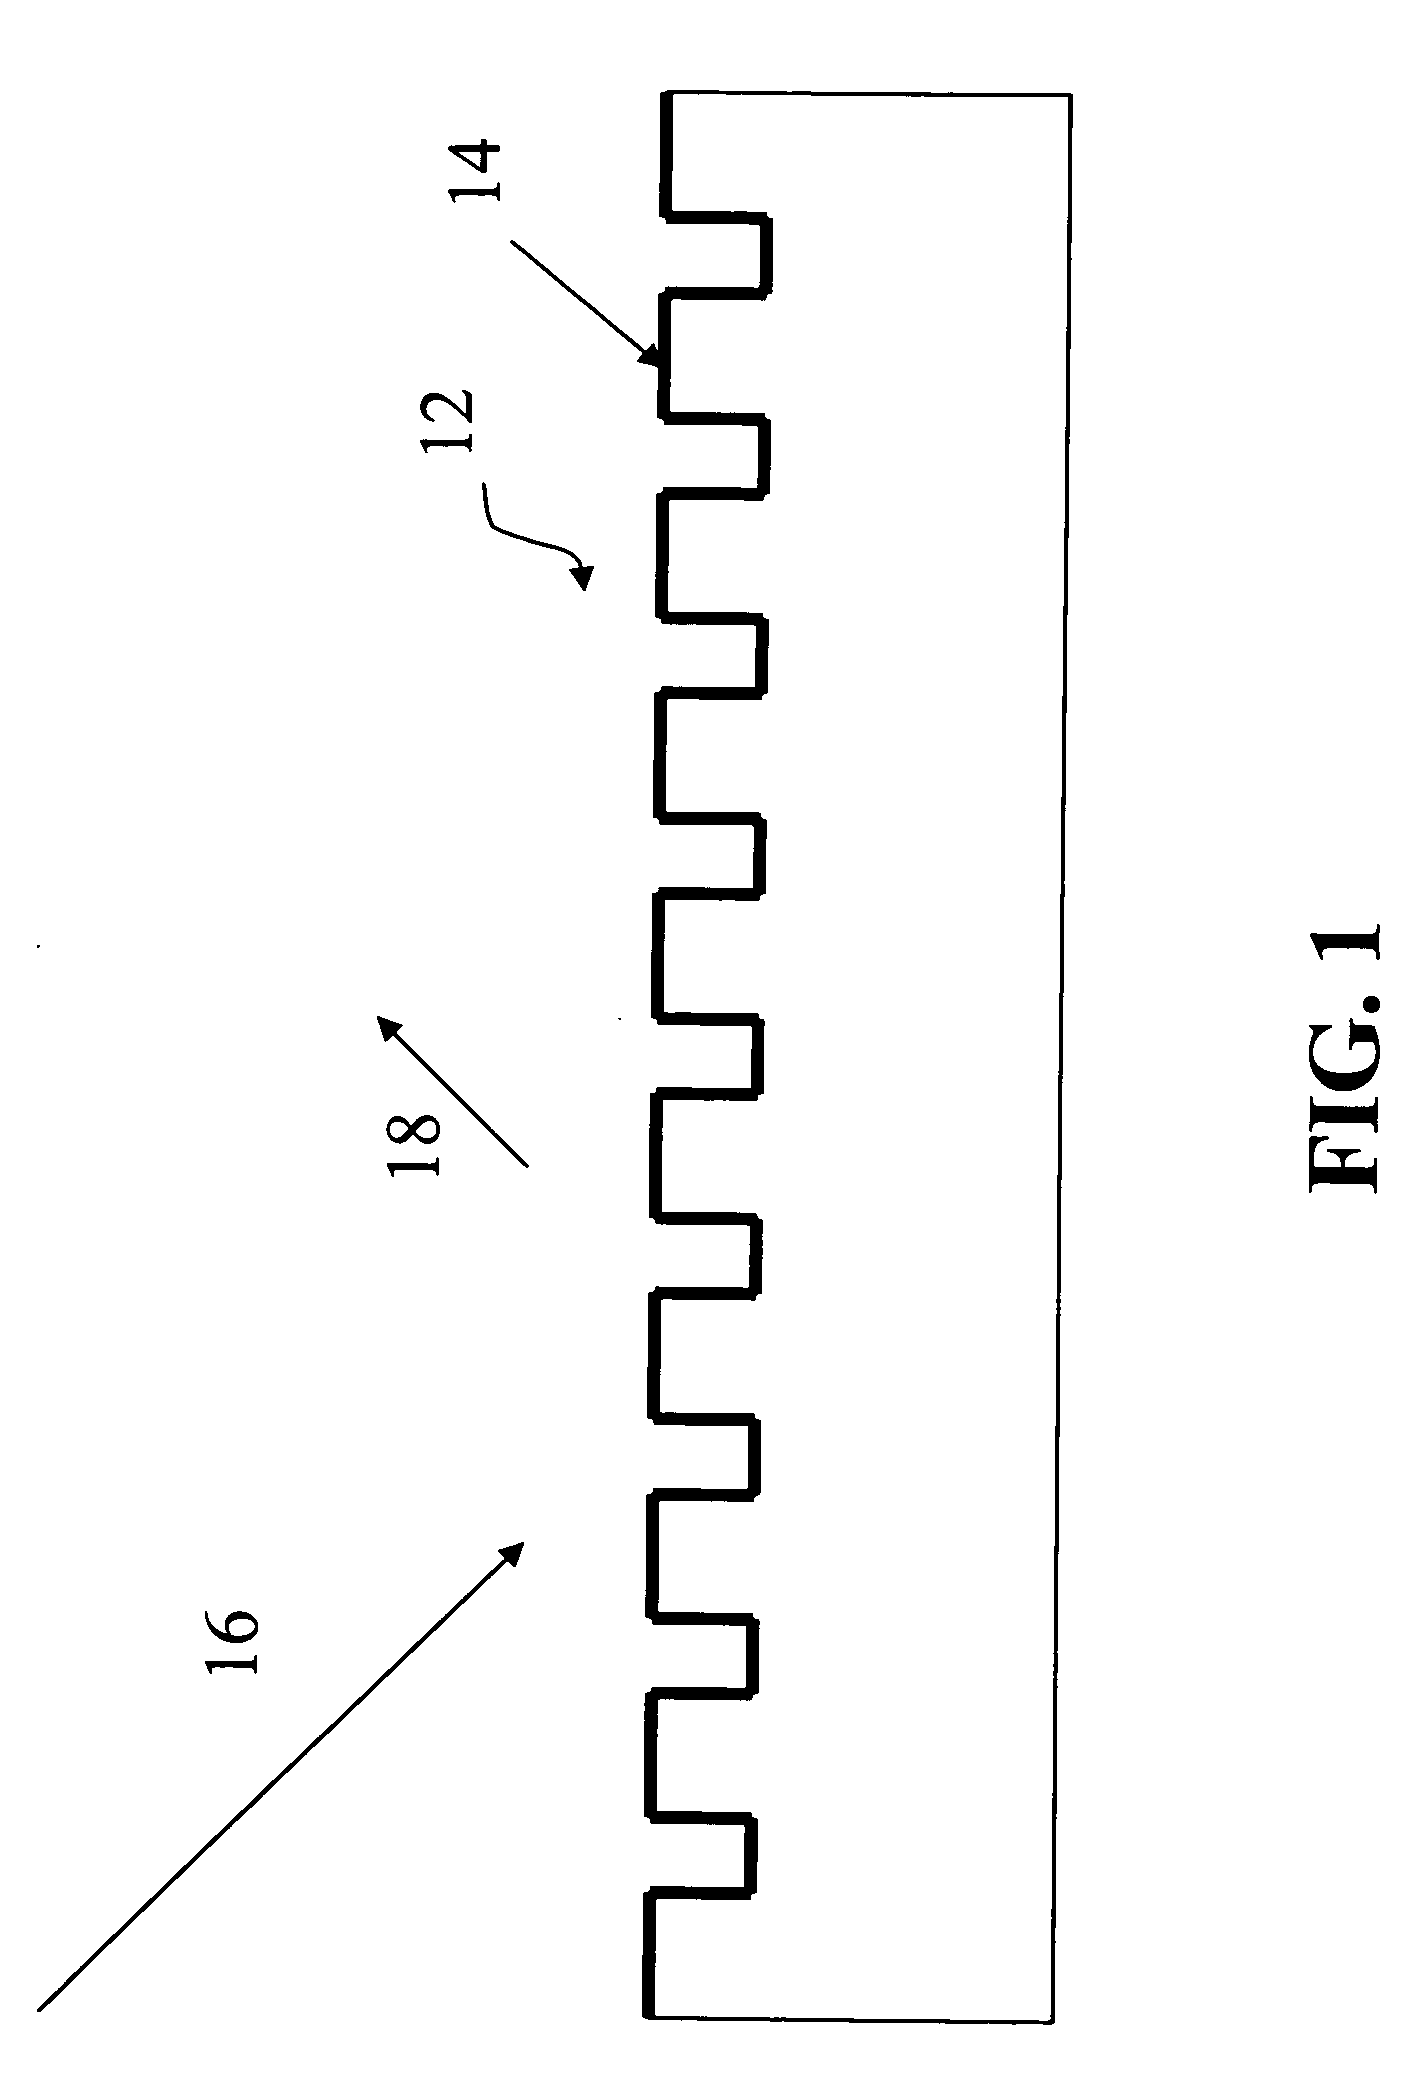 Nonlinear optical guided mode resonance filter